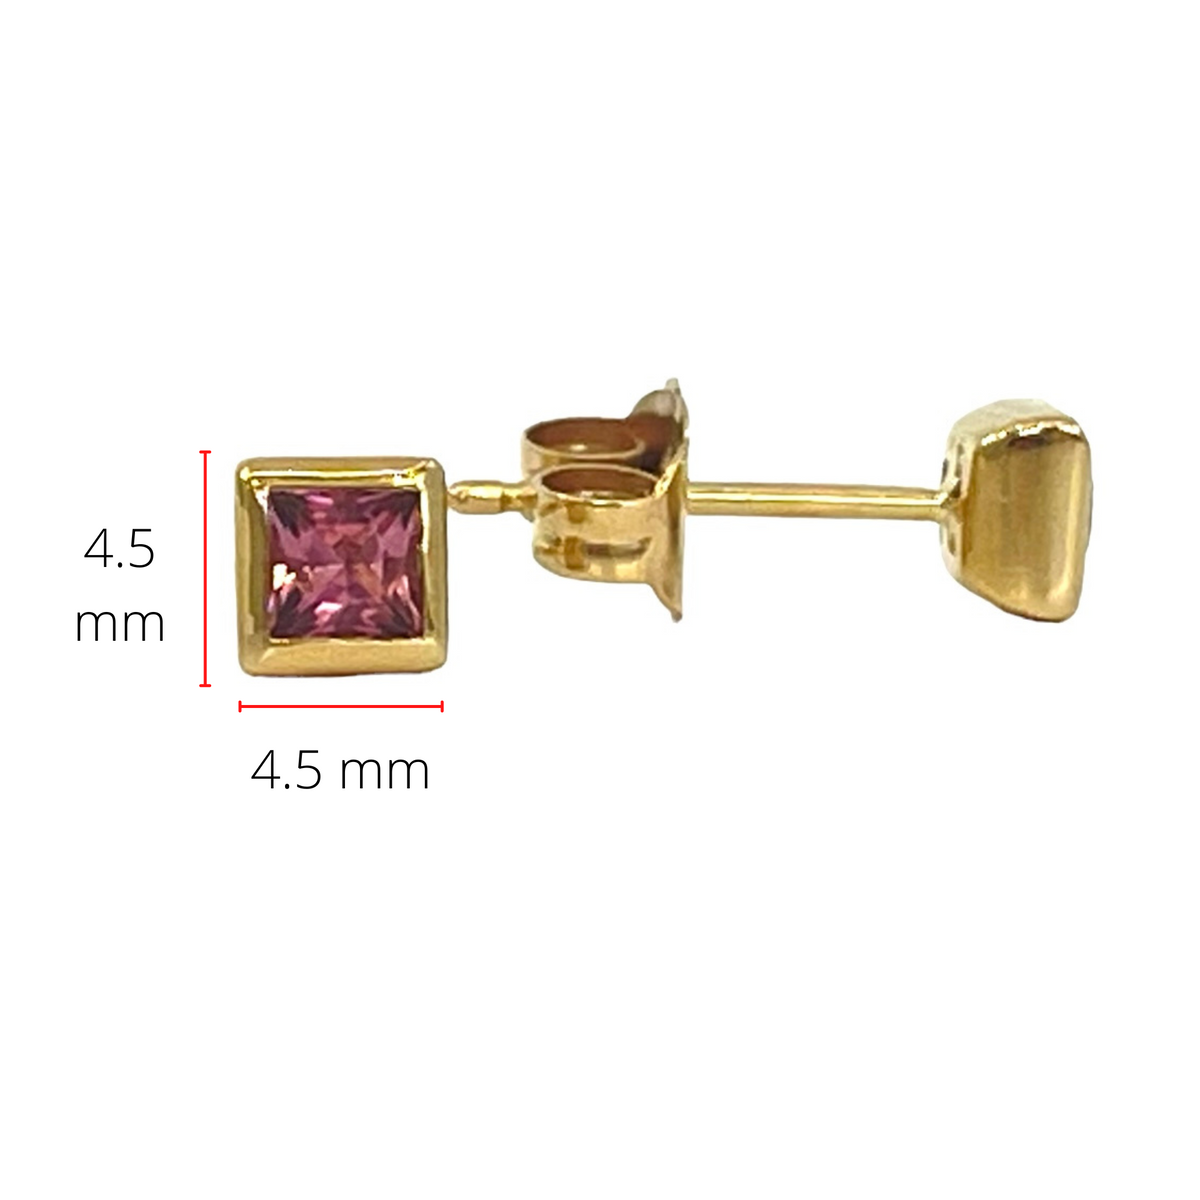 10K Yellow Gold 3mm Princess Cut Pink Tourmaline Stud Earrings with Butterfly Backings